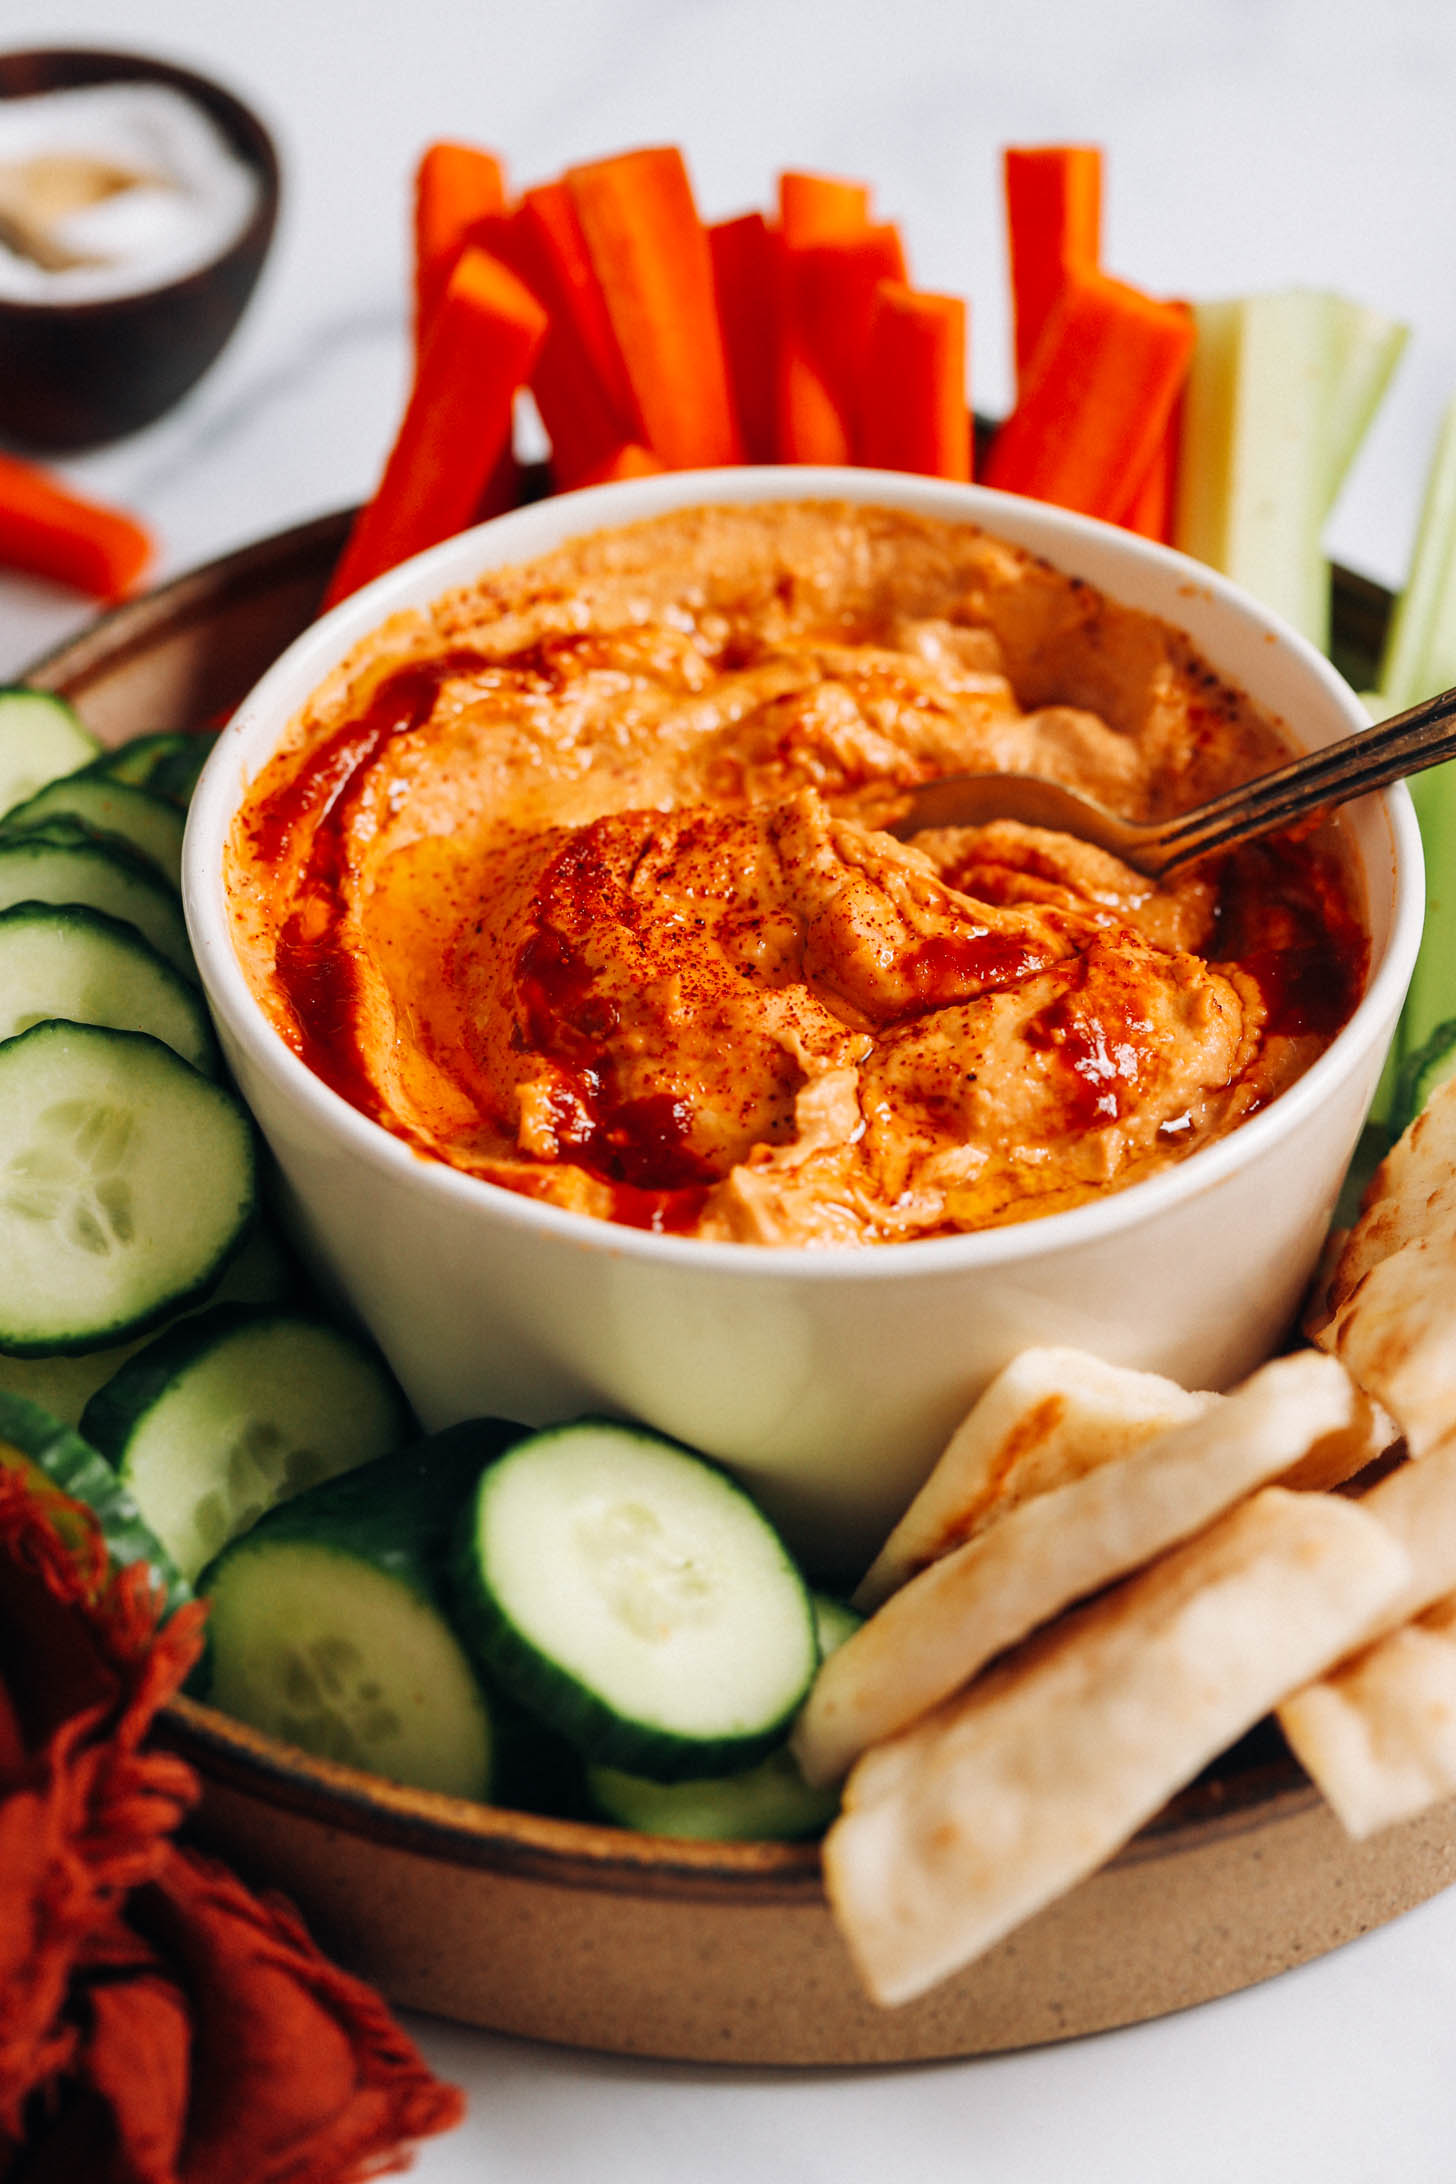 Bowl of spicy chipotle hummus surrounded by cucumber slices, carrot and celery sticks, and pita bread